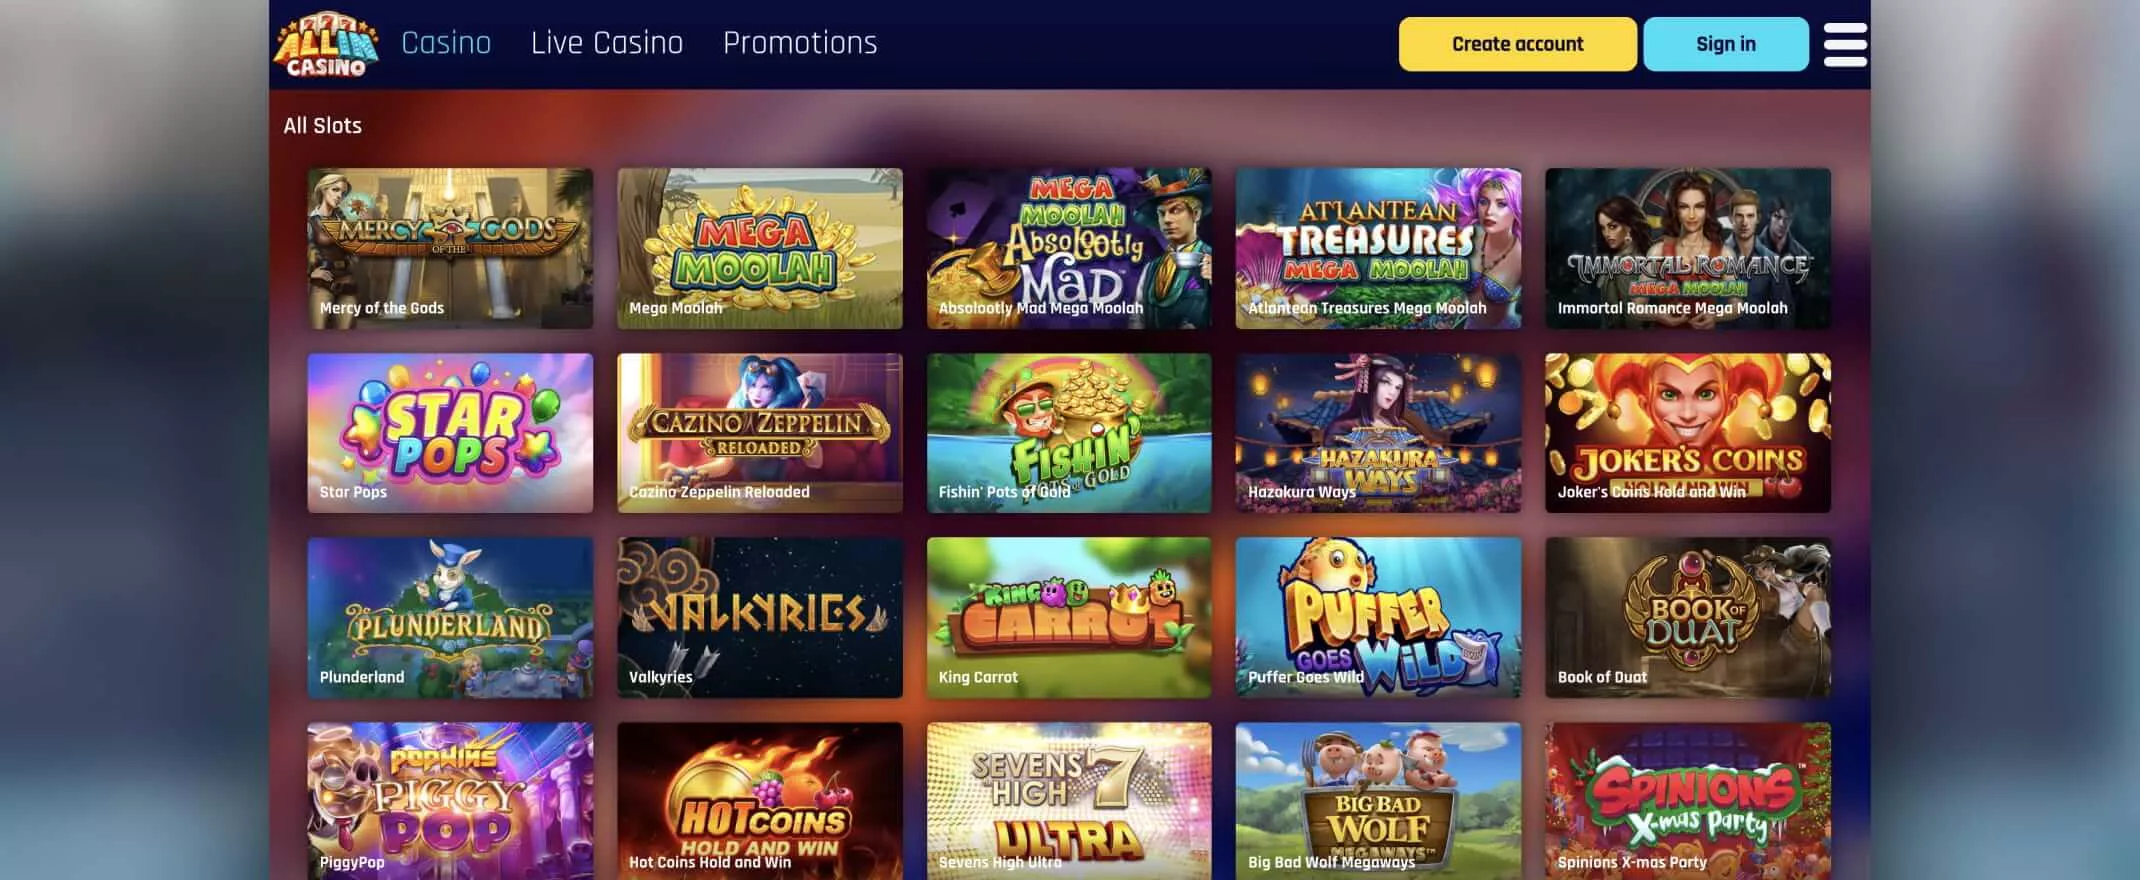 All in casino screenshot of the games